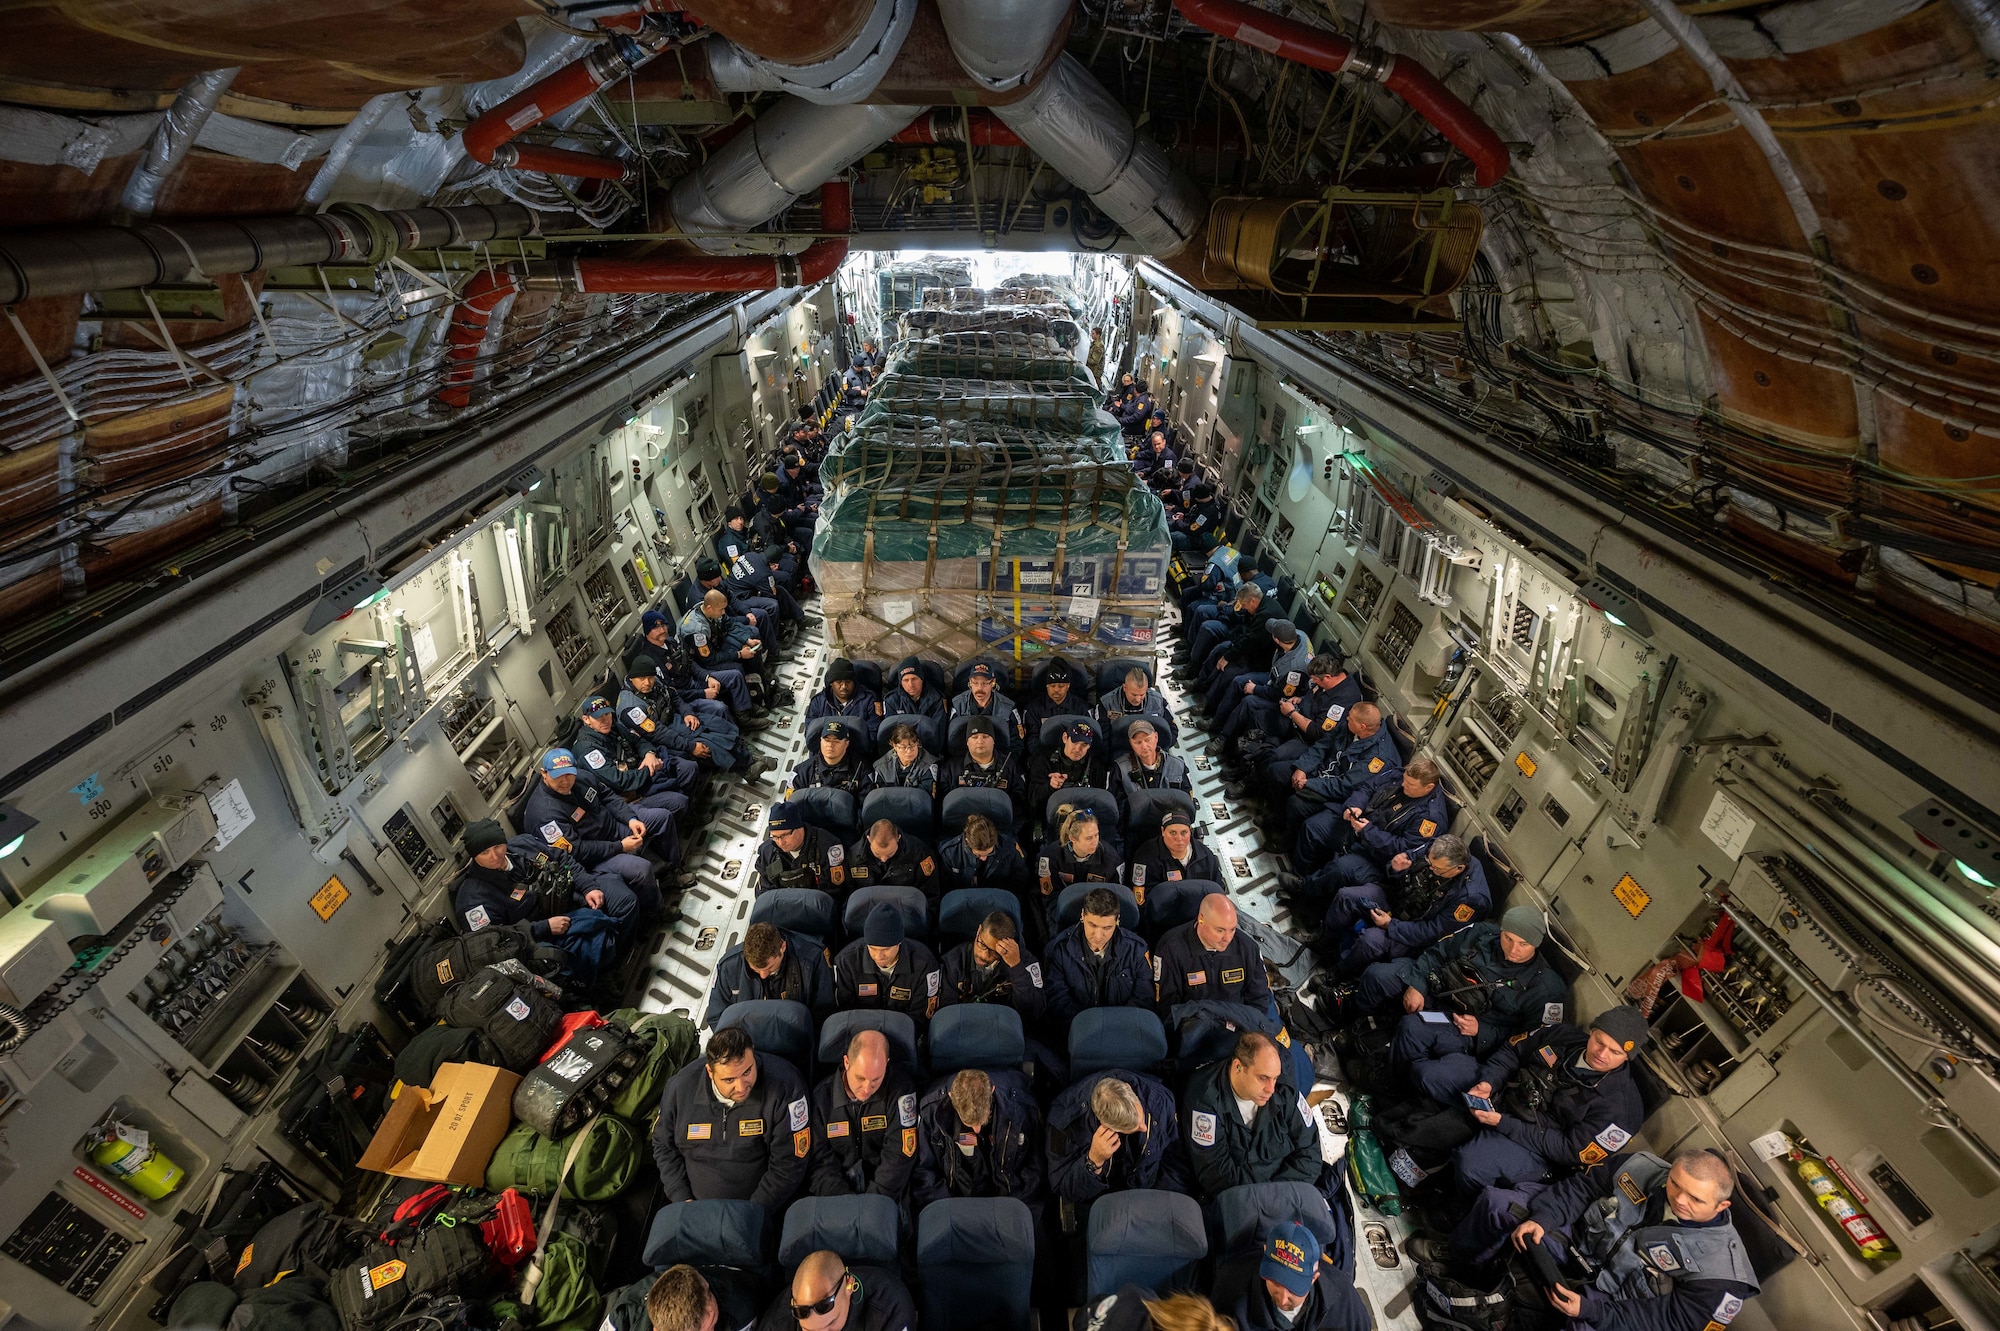 Urban search and rescue members from Fairfax County, Virginia, on a C-17 Globemaster III on Dover Air Force Base, Delaware, Feb. 7, 2023, en route to Türkiye to assist with earthquake relief. The U.S. Agency for International Development is mobilizing emergency humanitarian assistance following the worst earthquake to hit the region in almost a century.